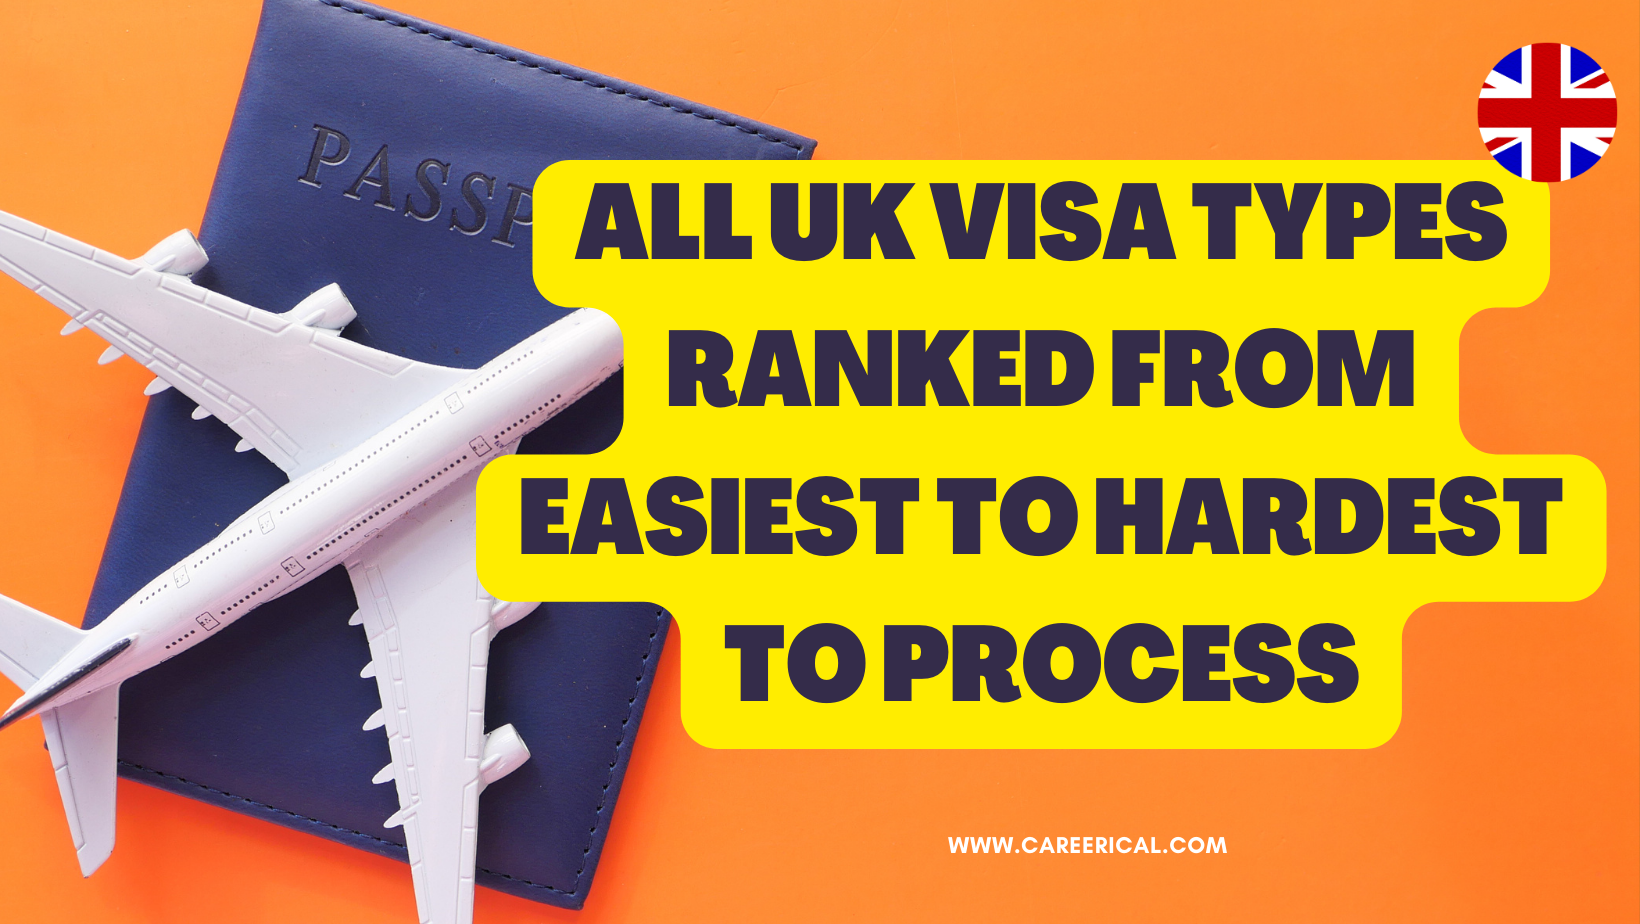 All UK Visa Types Ranked from Easiest to Hardest to Process